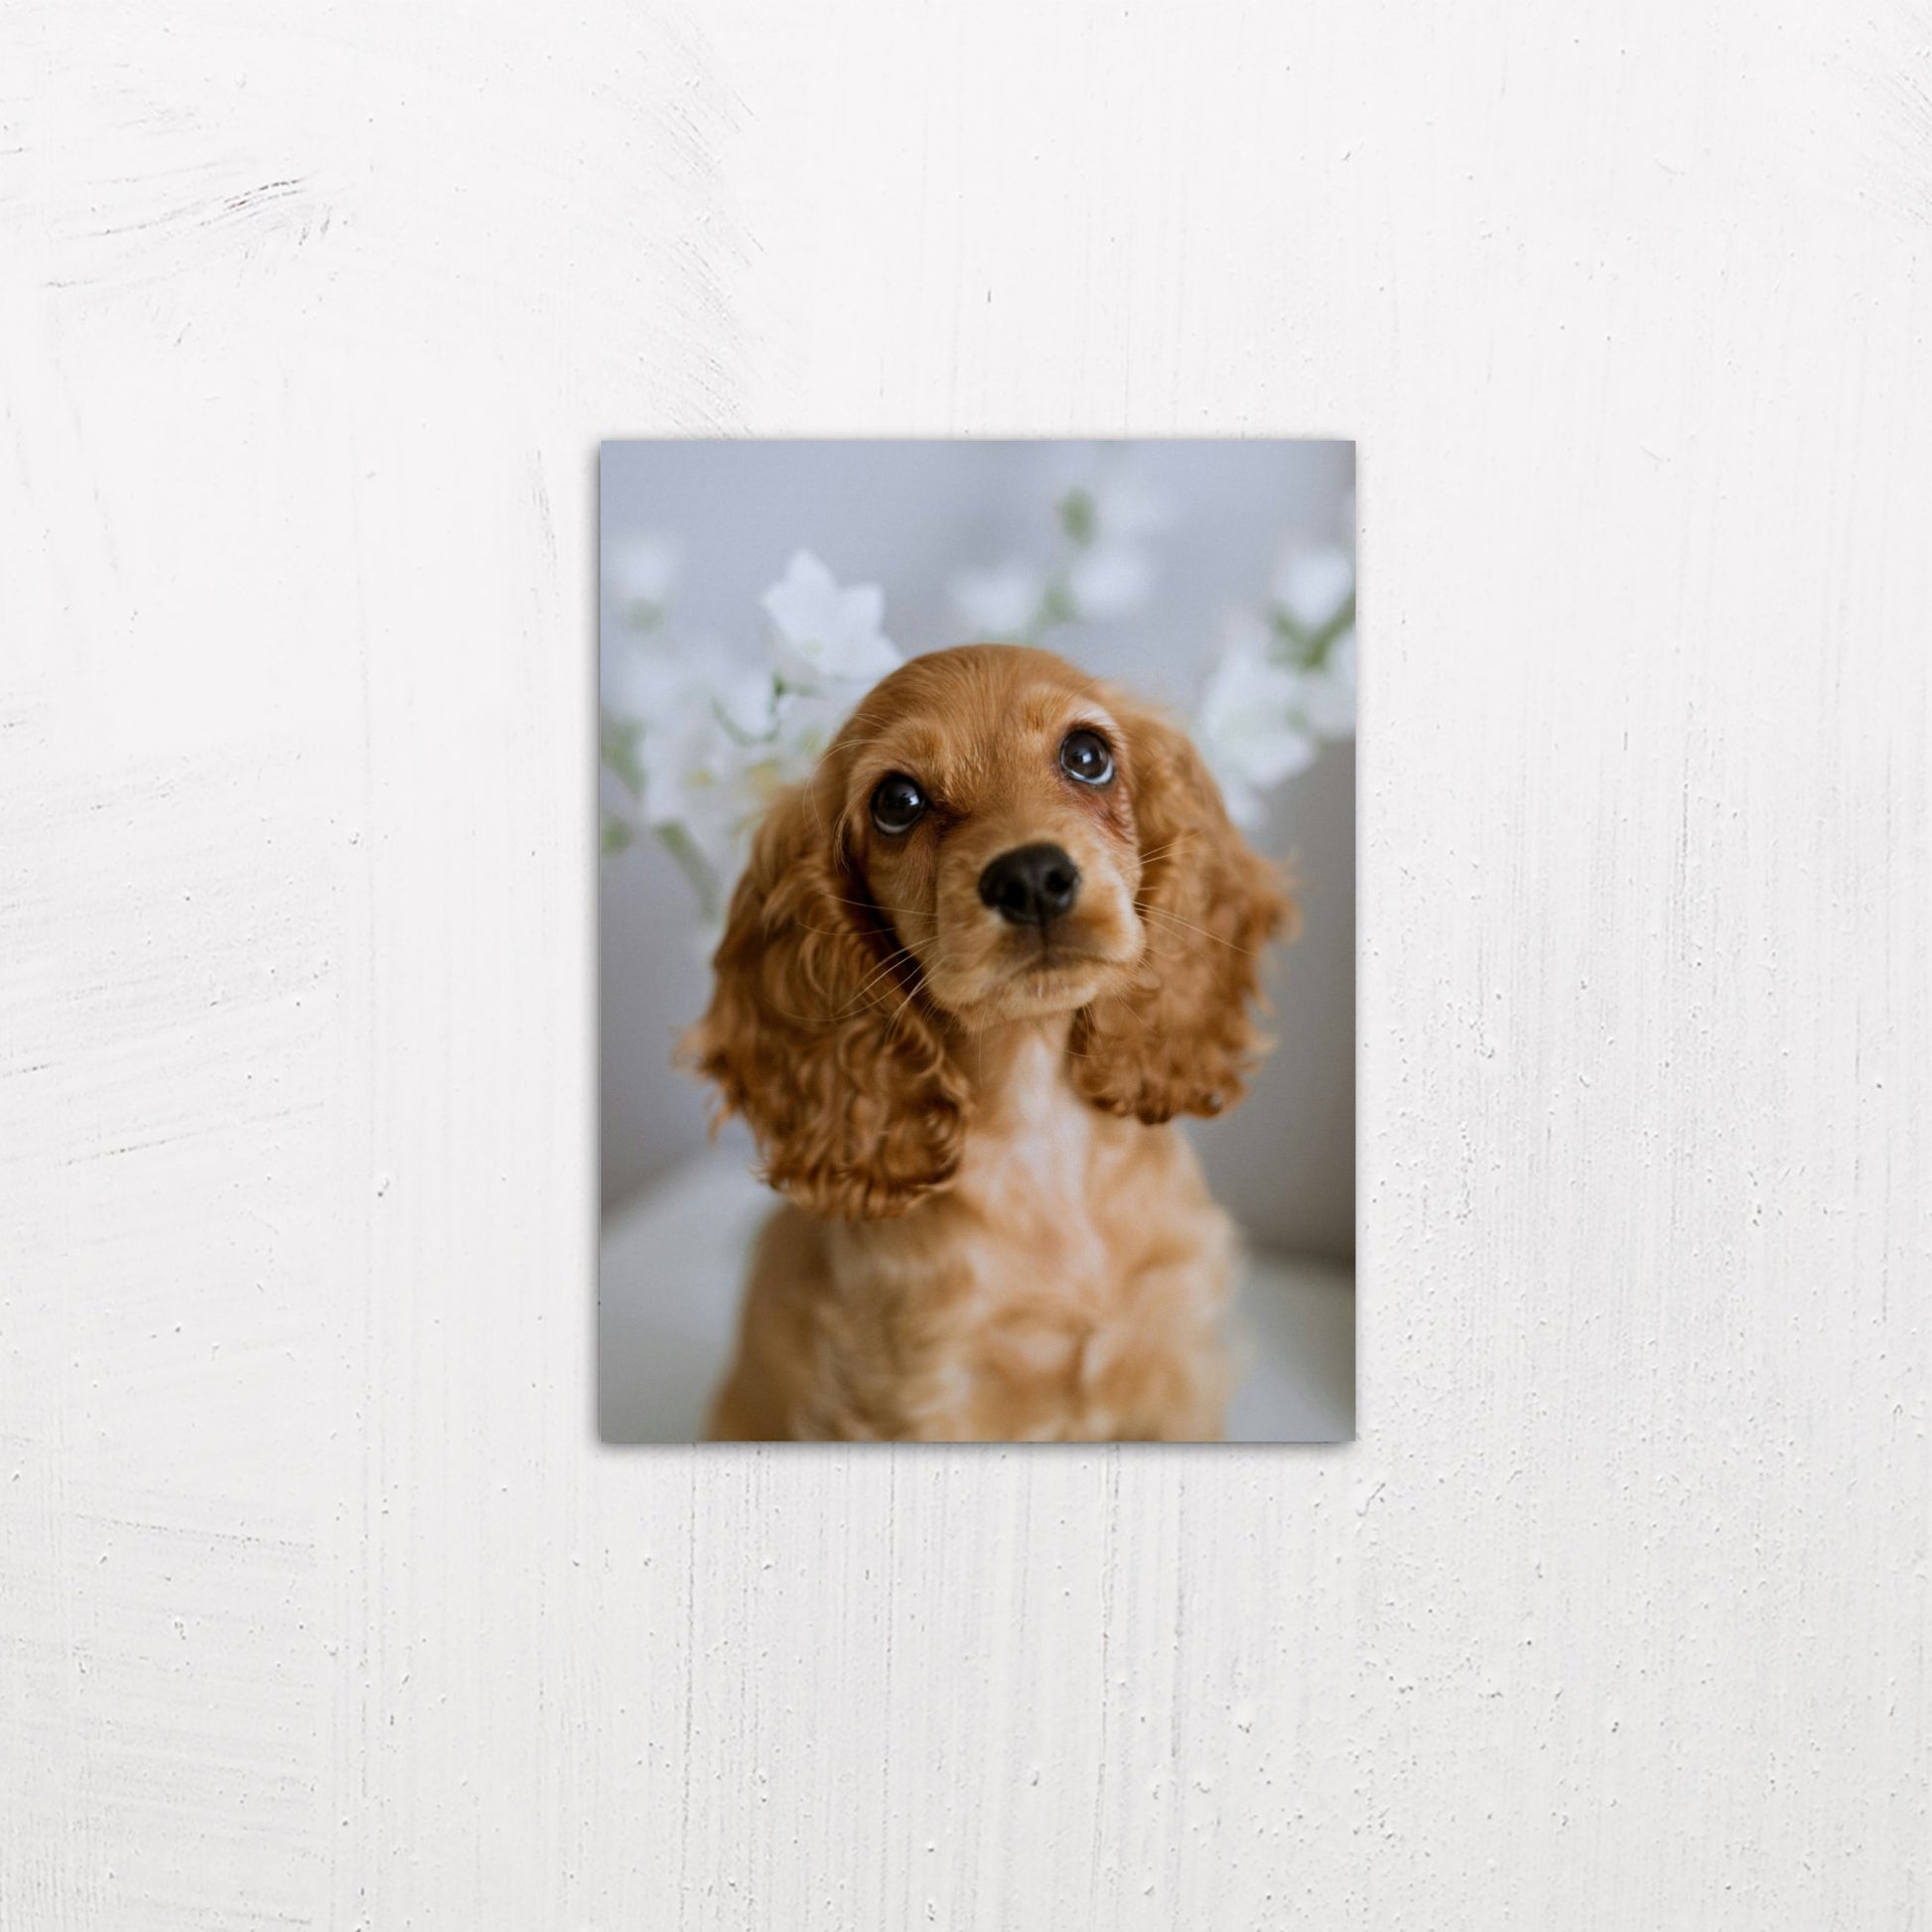 A small size metal art poster display plate with printed design of a Cute Golden Cocker Spaniel